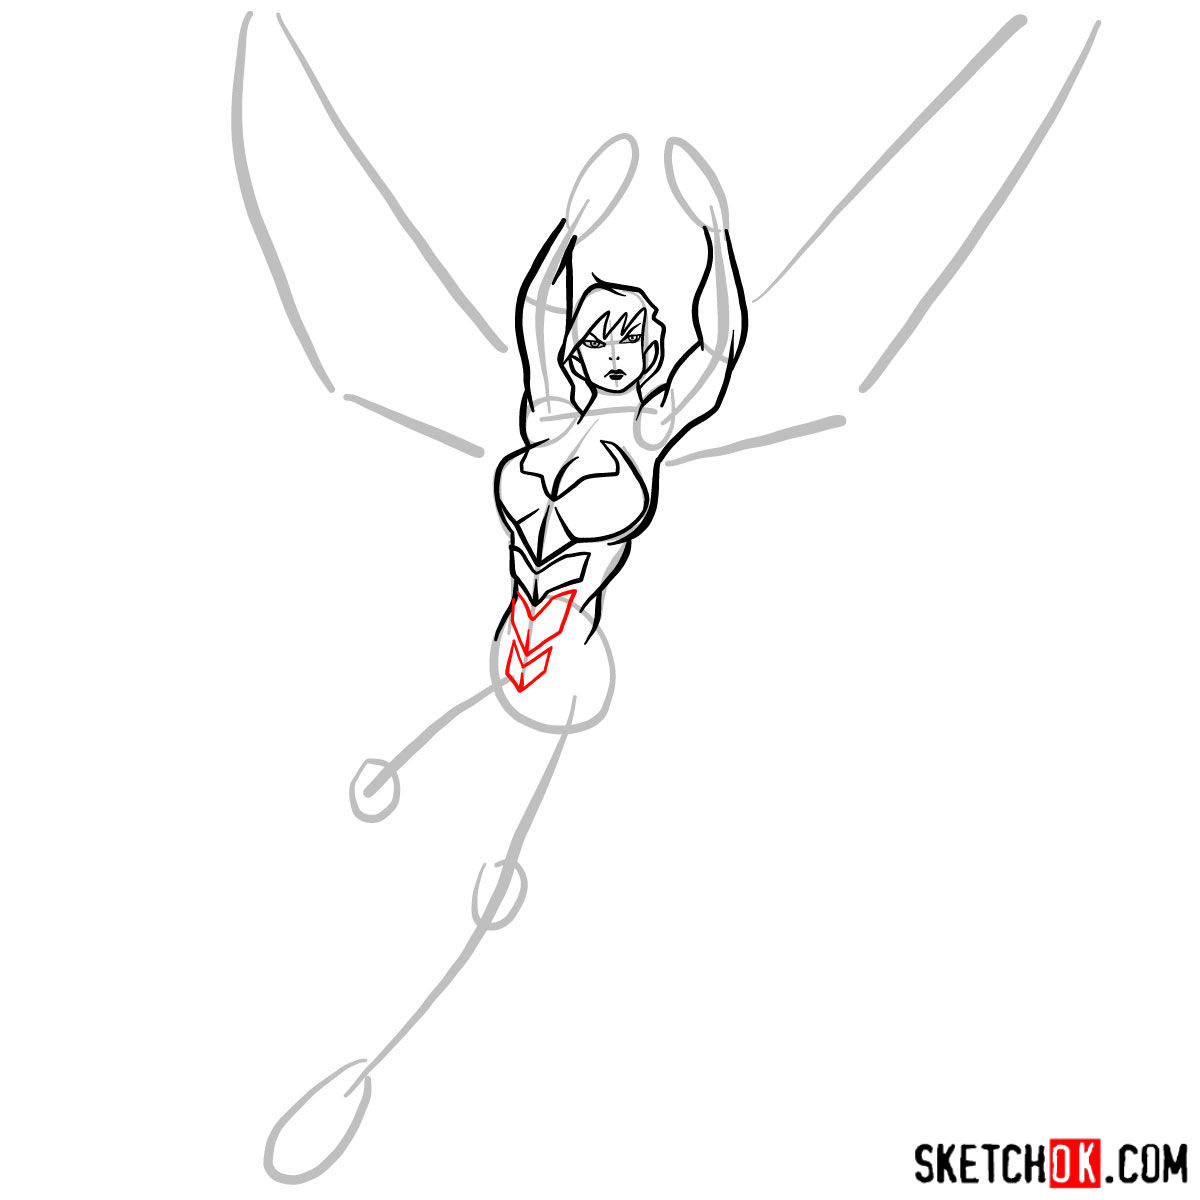 How to draw Wasp, Janet van Dyne from Marvel Comics - step 07